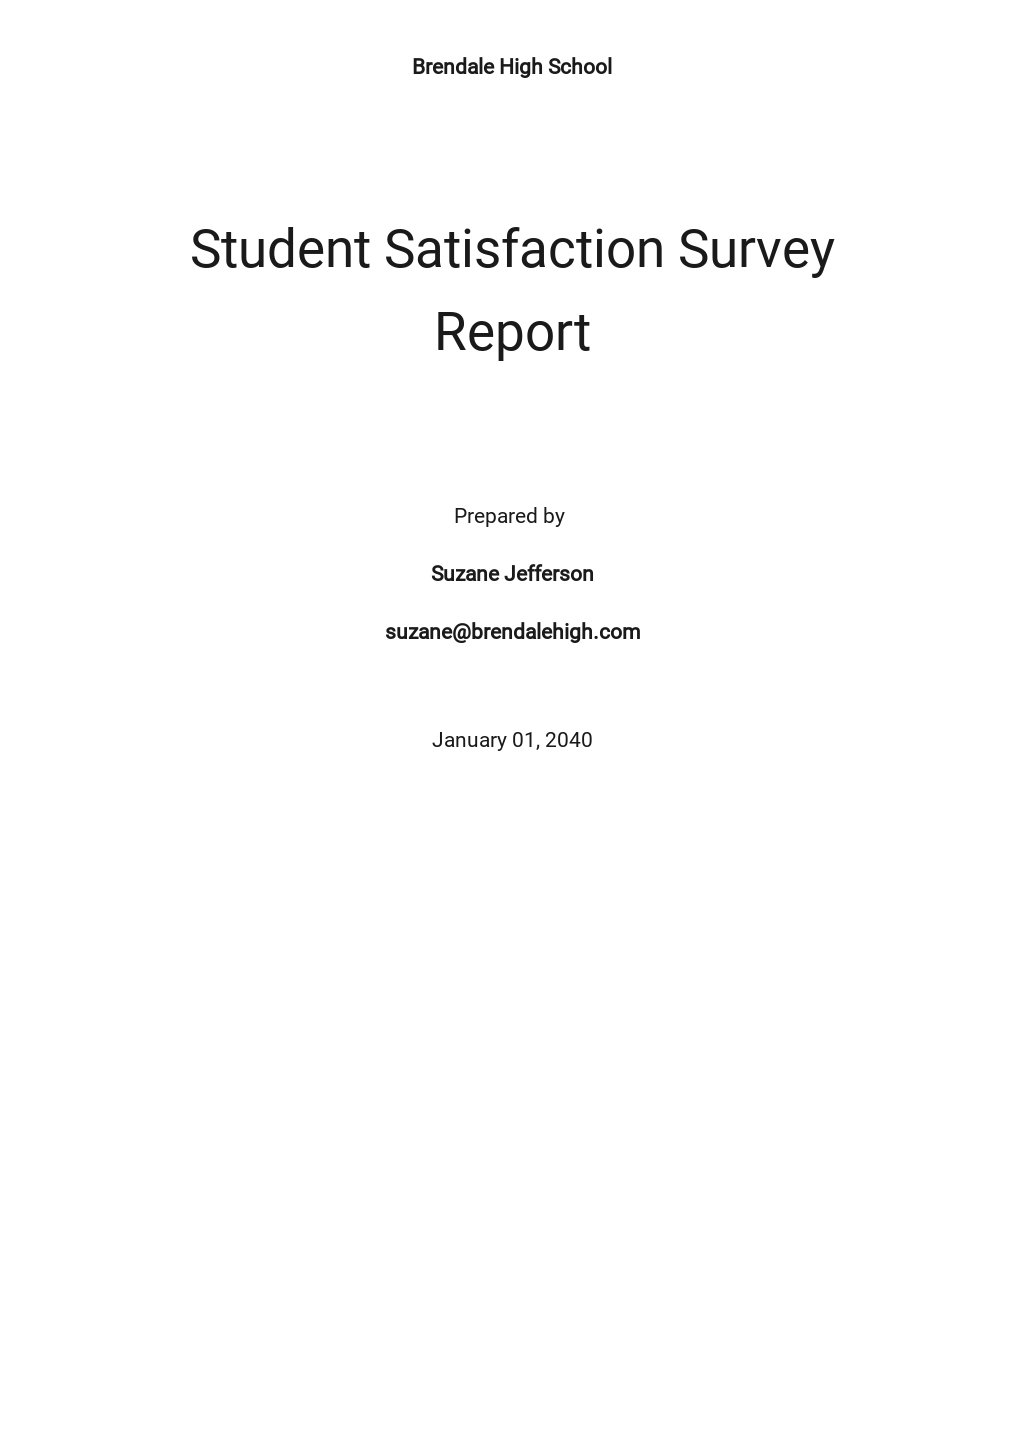 how to write a report based on a survey